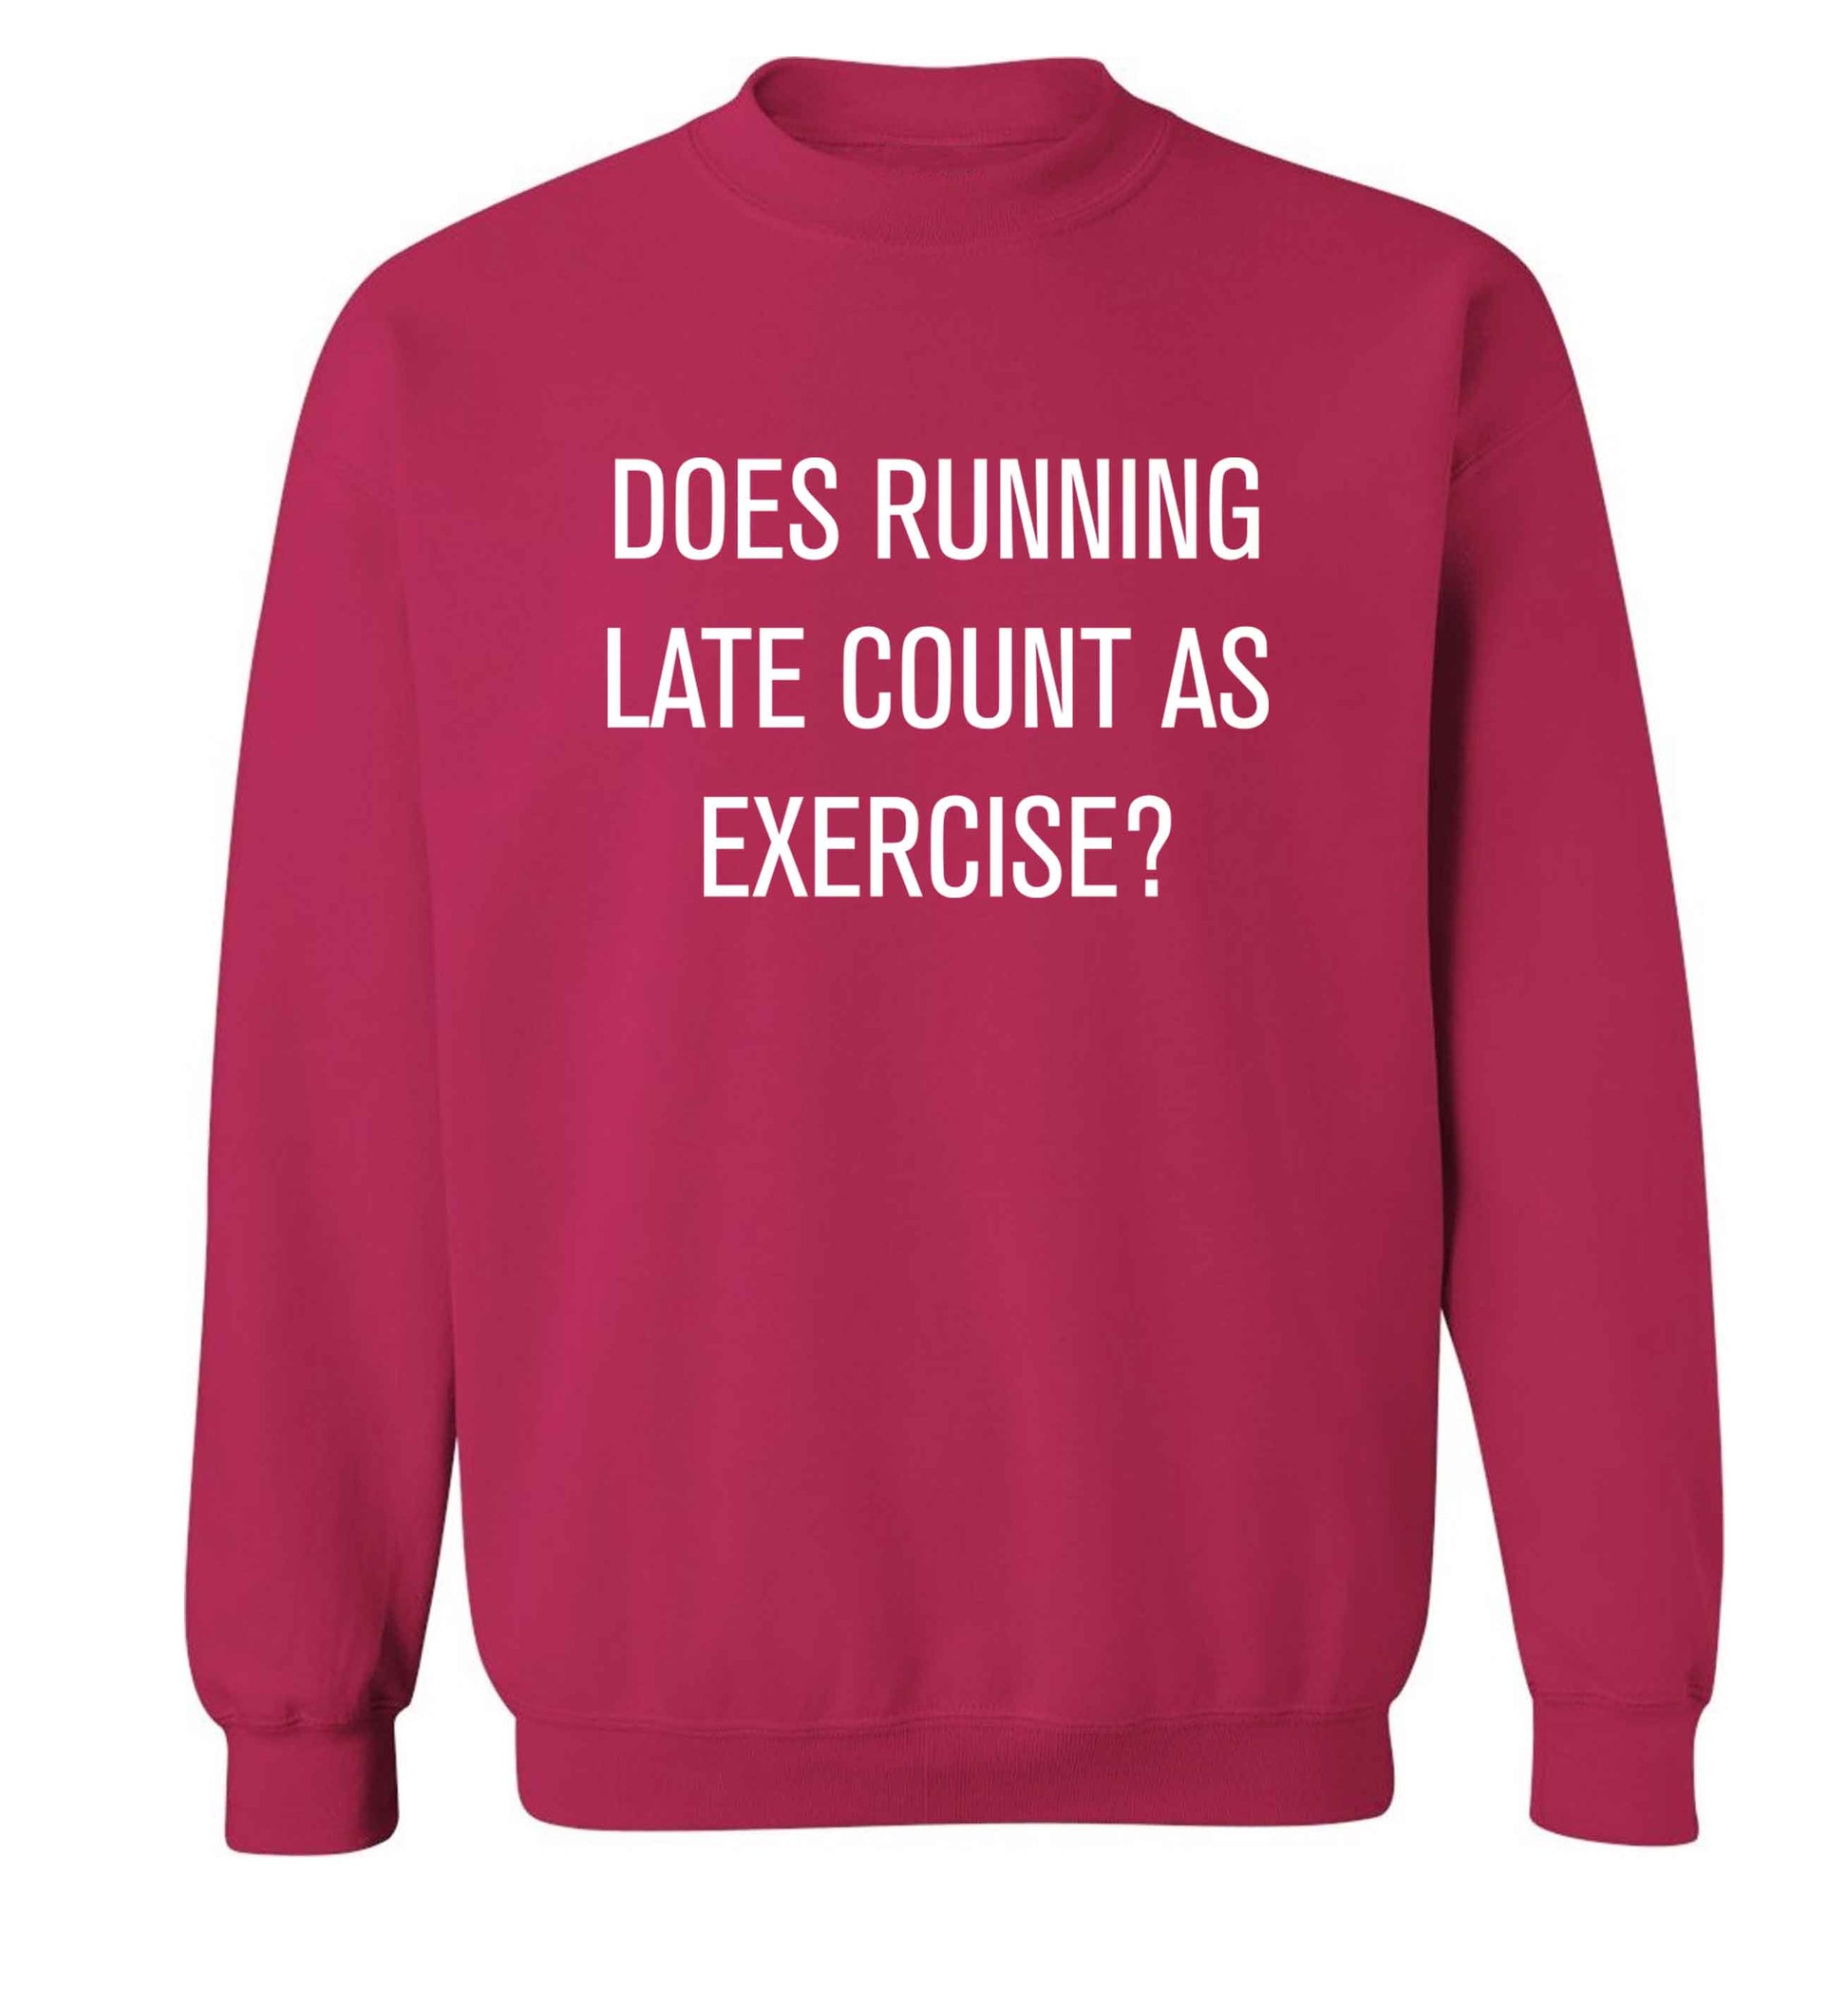 Does running late count as exercise? adult's unisex pink sweater 2XL